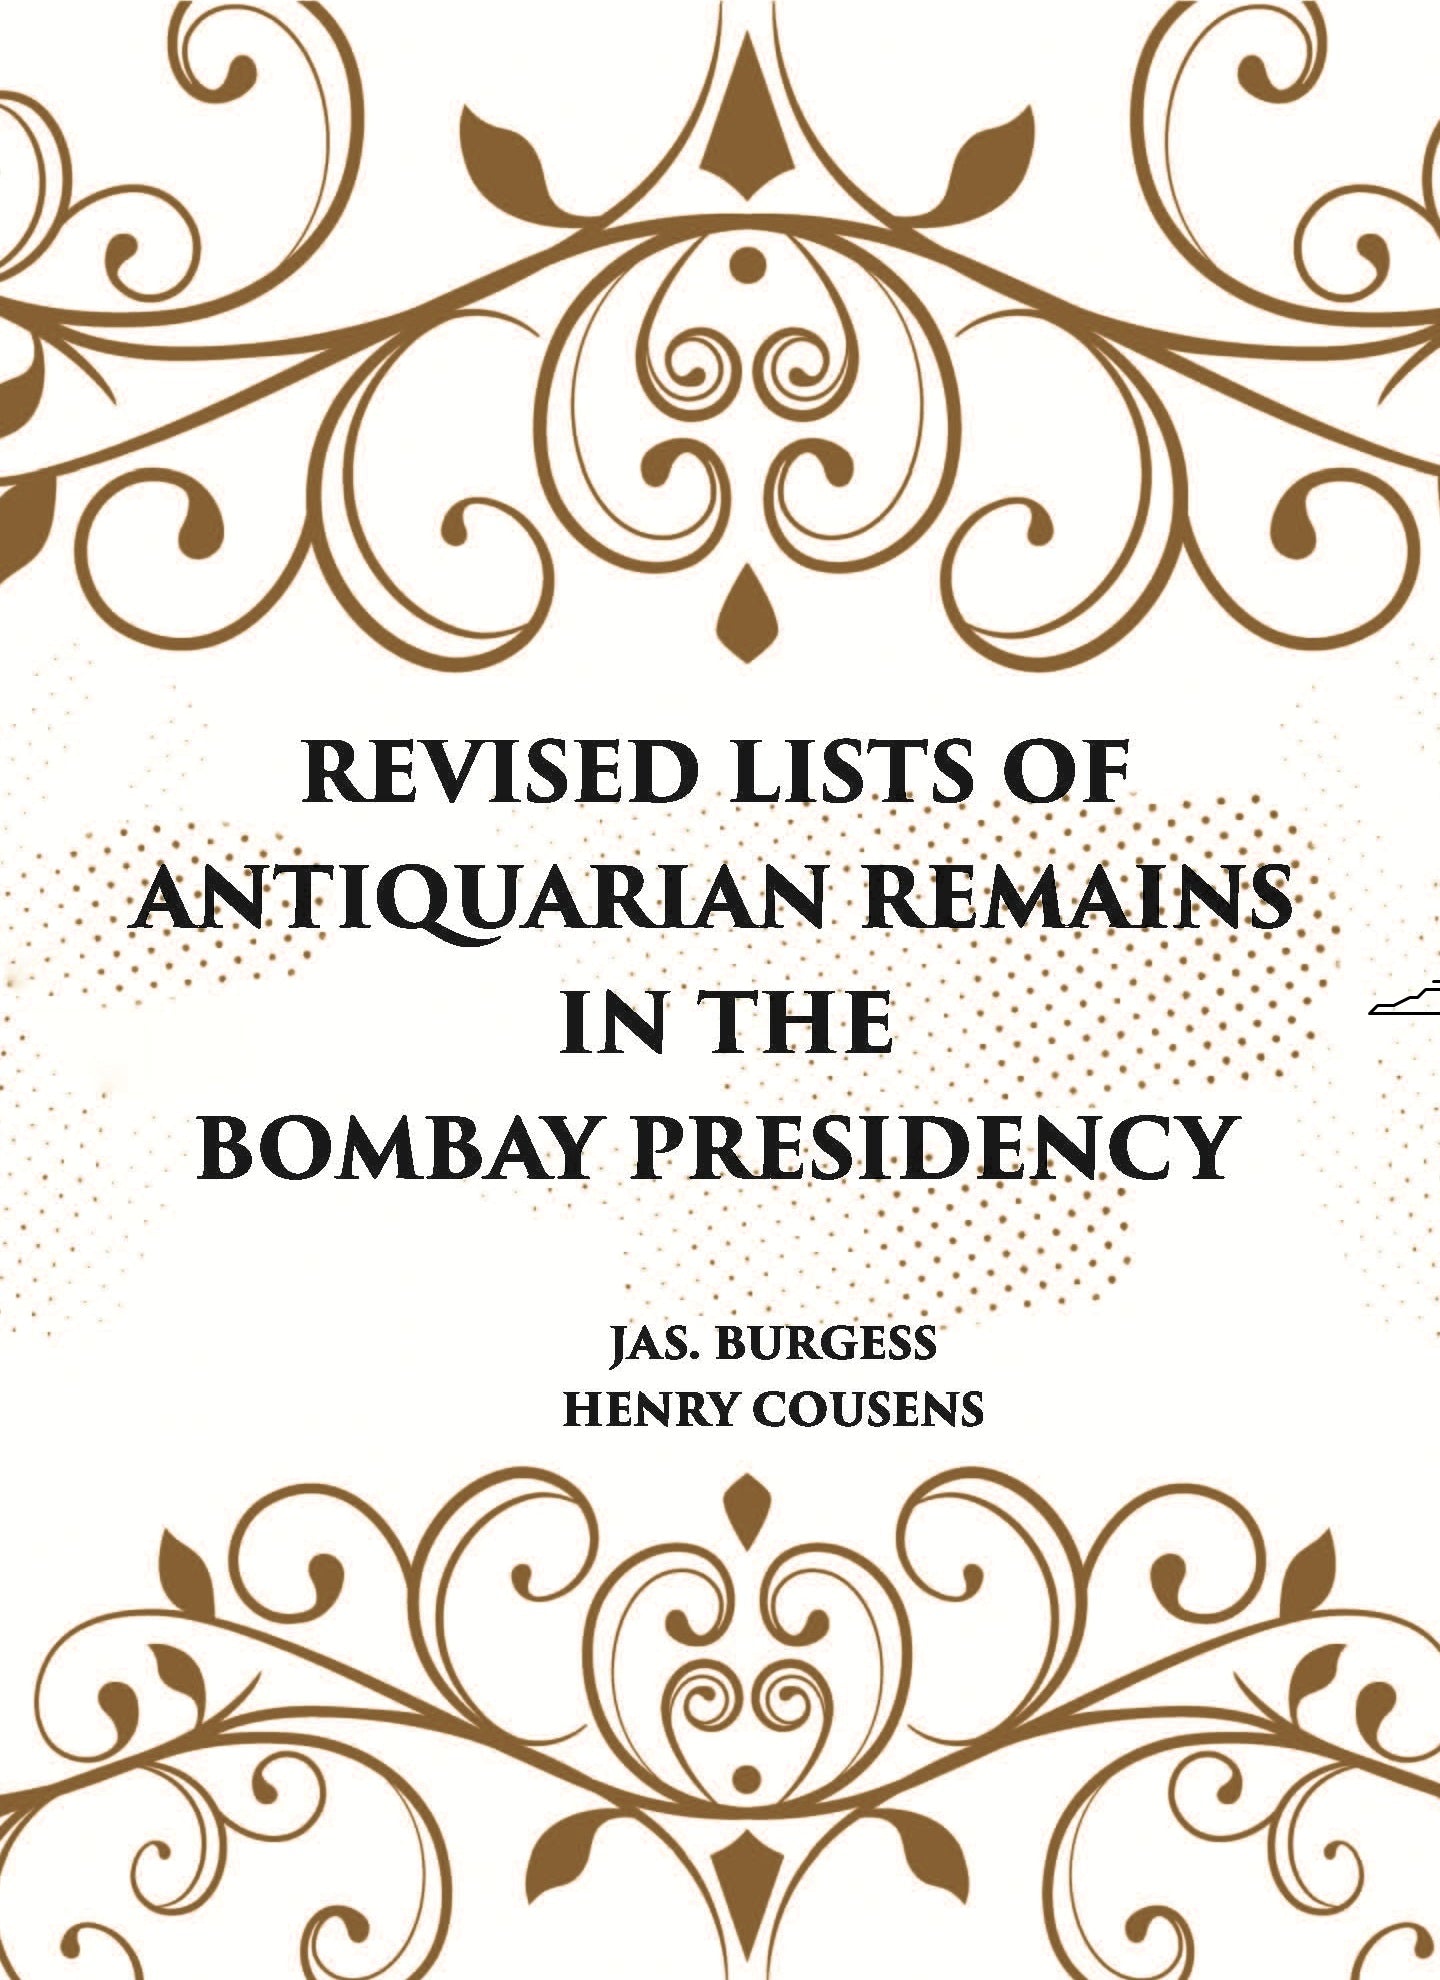 REVISED LISTS OF ANTIQUARIAN REMAINS IN THE BOMBAY PRESIDENCY